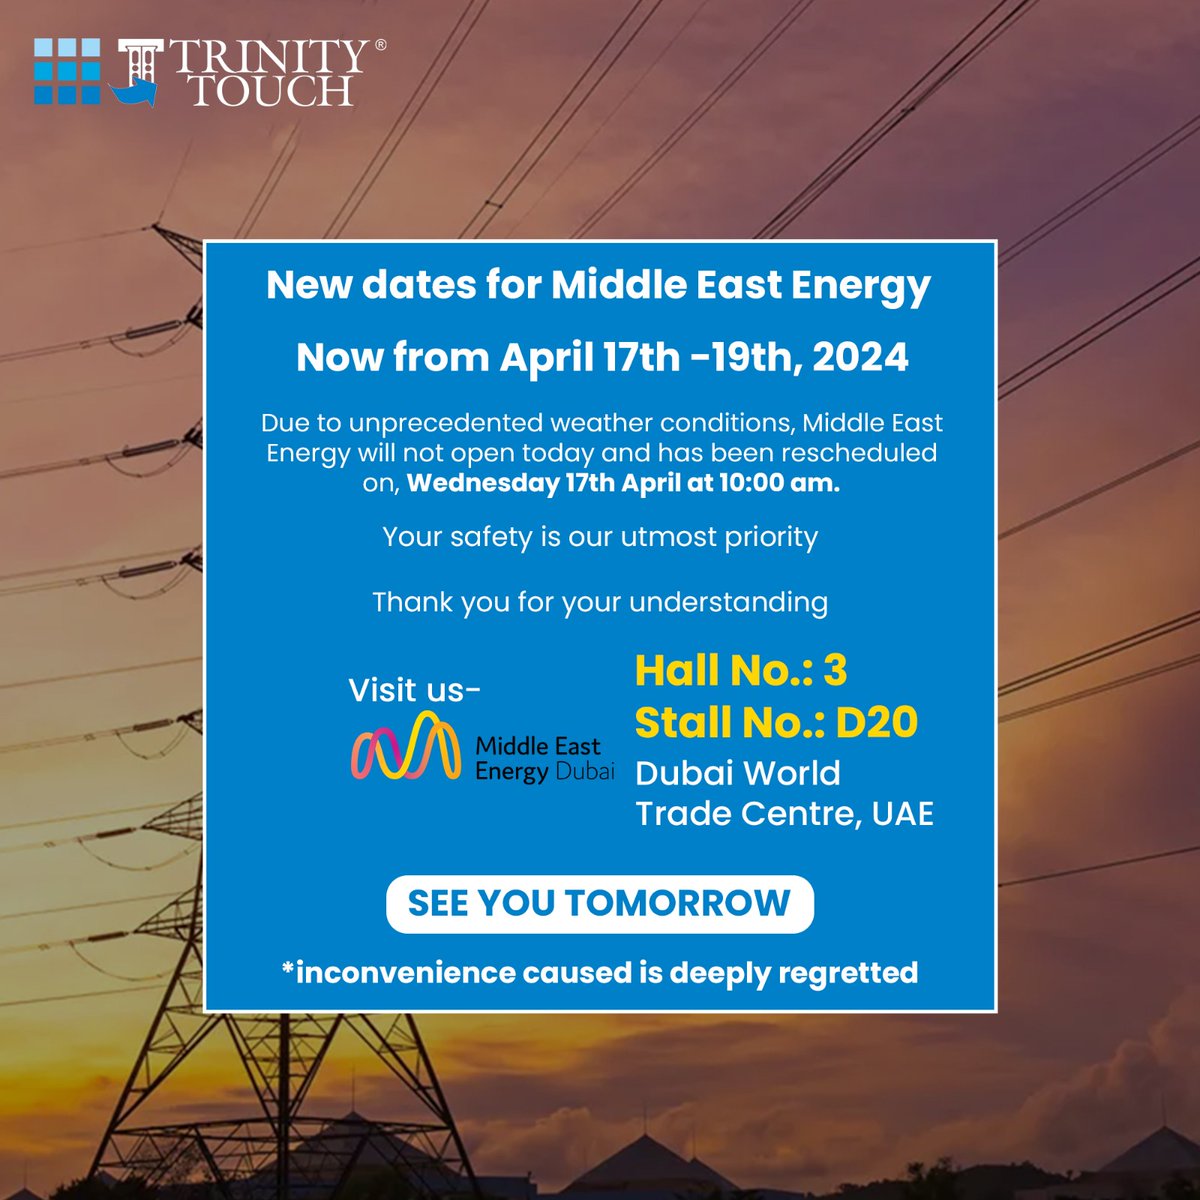 Attention Everyone !!

New Dates for Middle East Energy, opening tomorrow, April 17, 2024

See you tomorrow at 10 am.

Rest assured; we're working hard to ensure a fantastic event for all attendees. Mark your calendars for the new date, and we look forward to seeing you there.